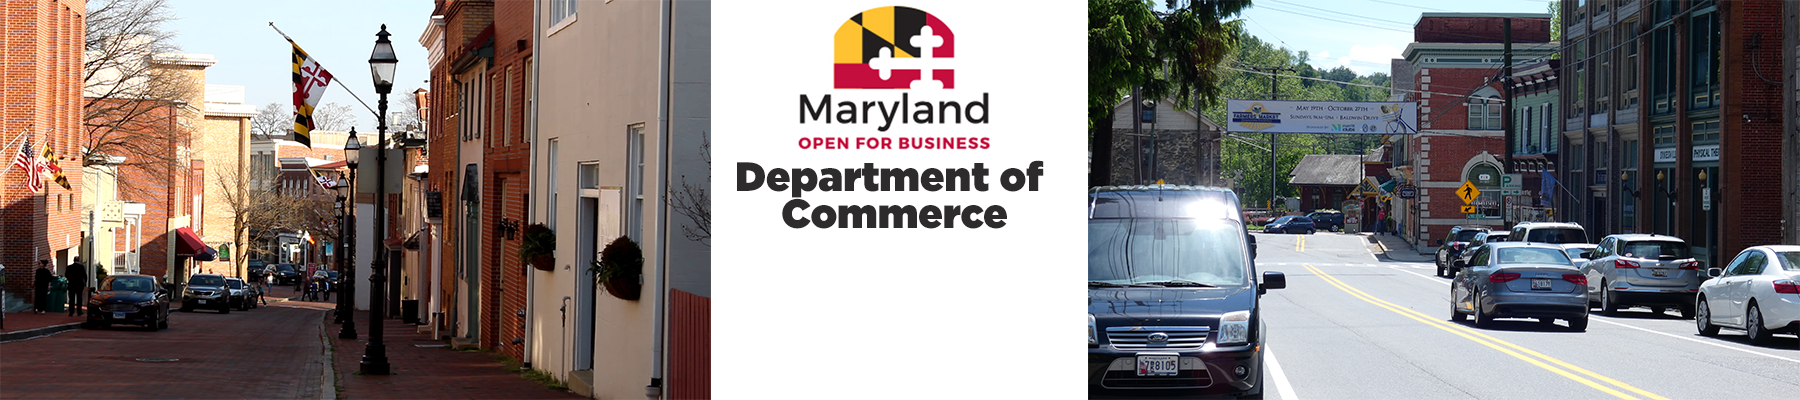 Maryland Department of Commerce Updates